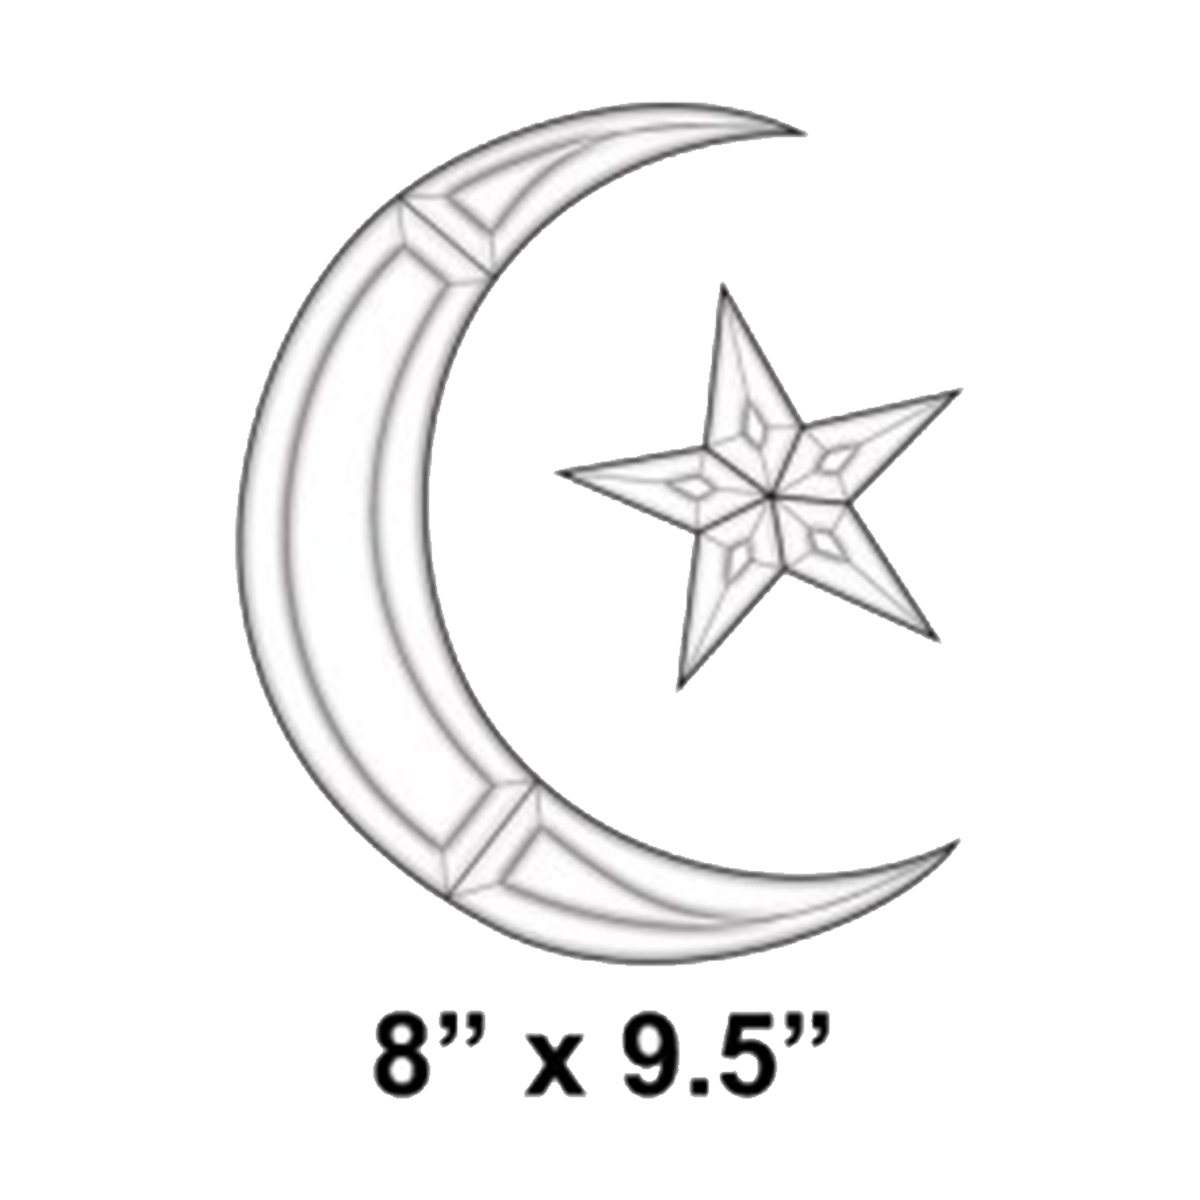 Outline crescent moon with star and moon phases. (1418518)